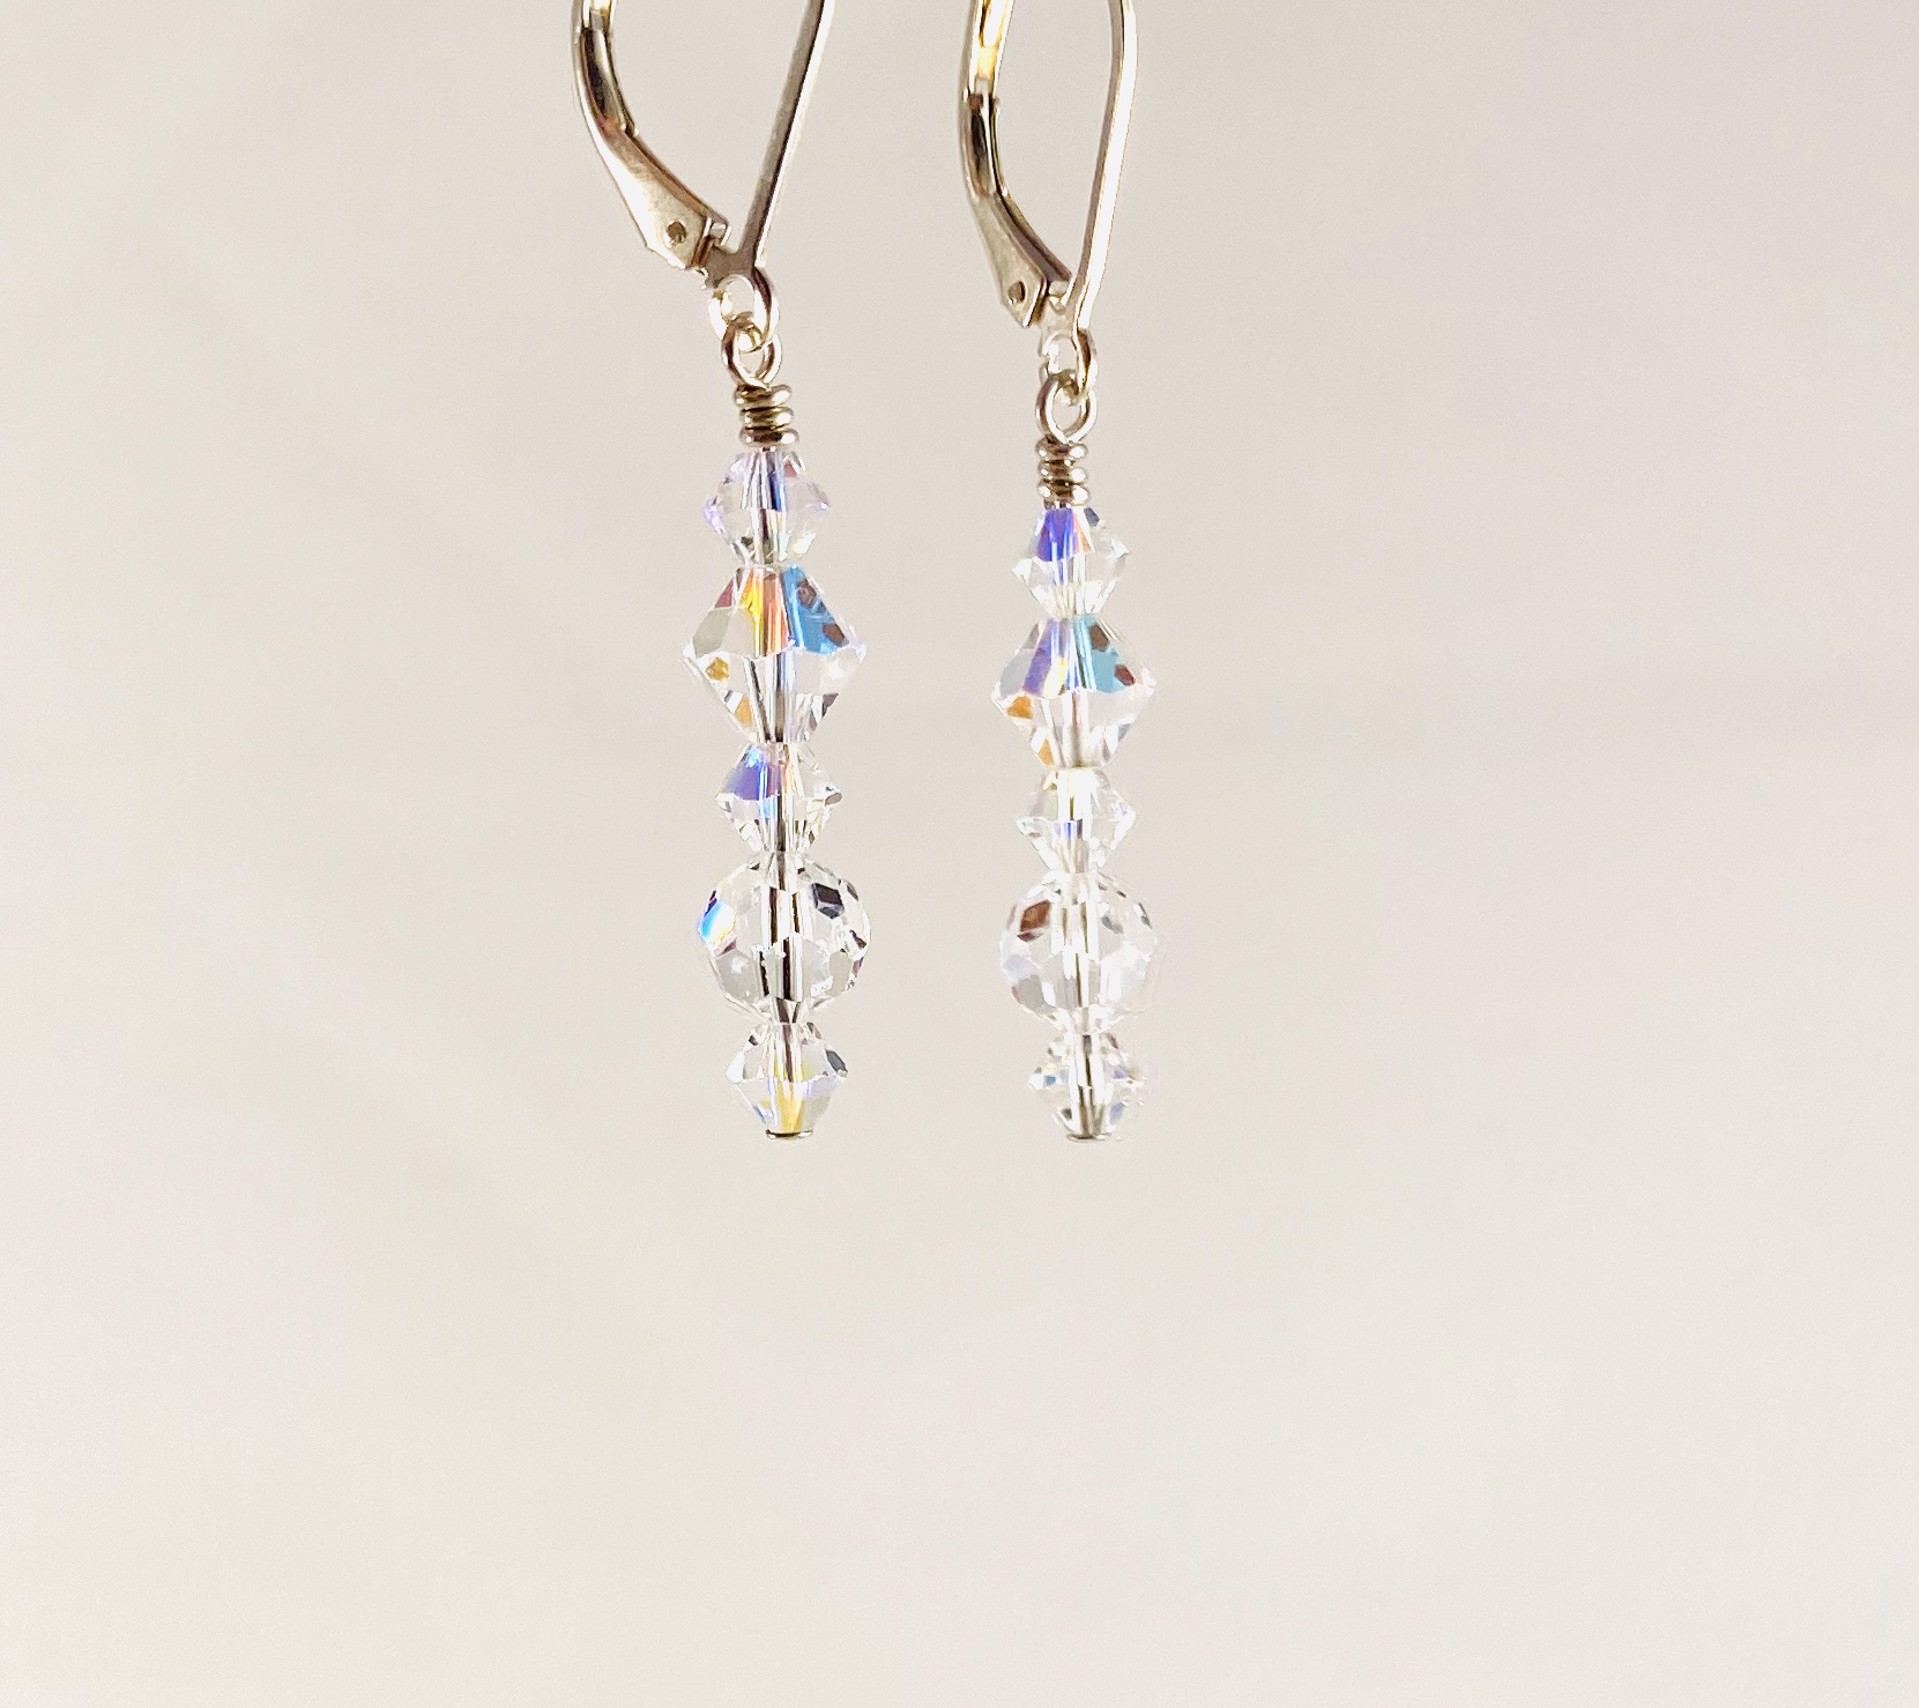 Crystal and Silver Earrings SHOSH19-41 by Shoshannah Weinisch